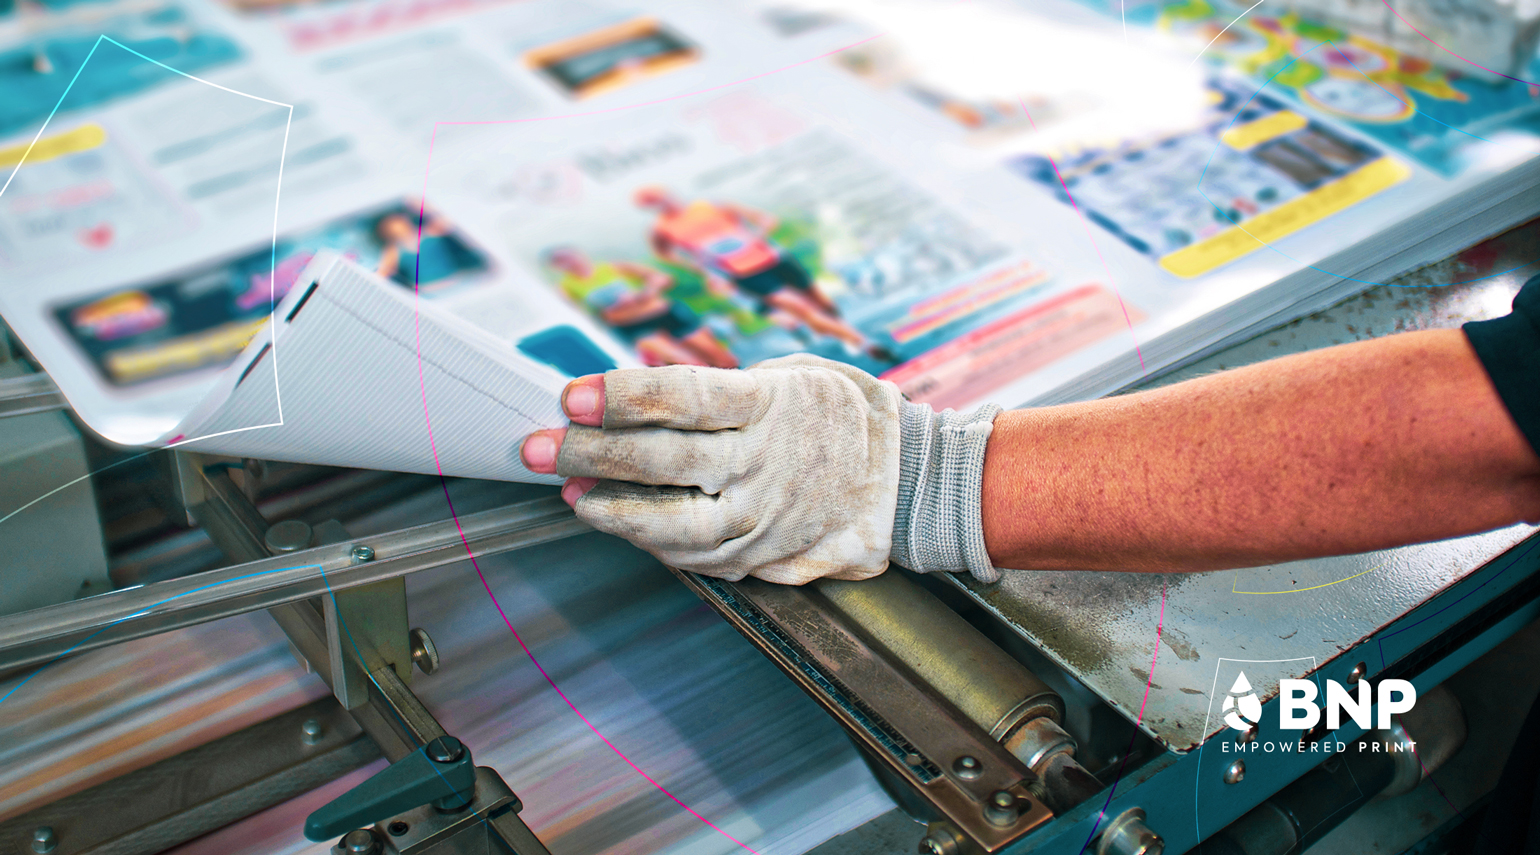 Top Trends To Help Grow Your Commercial Printing Business in 2021